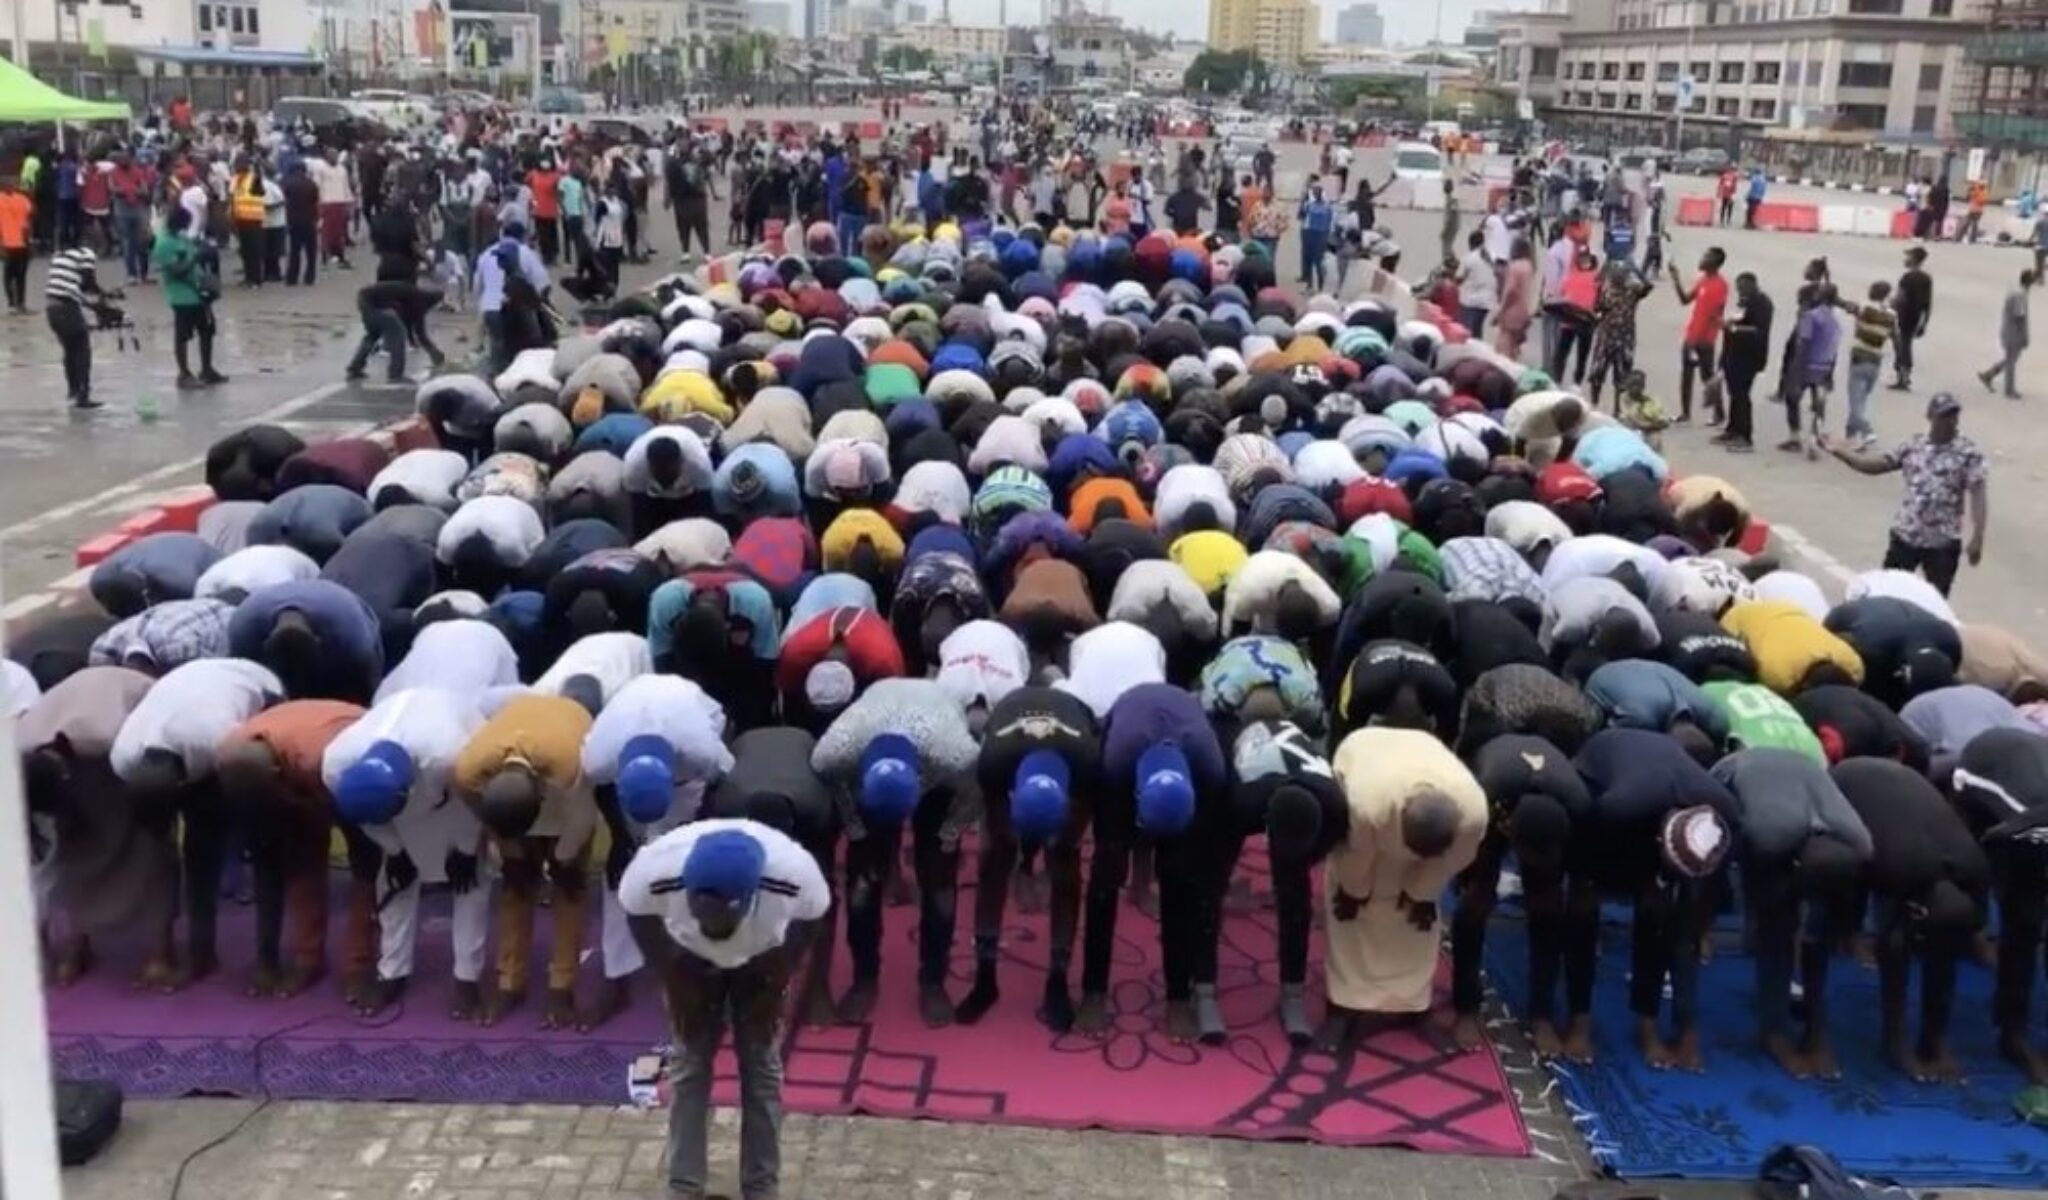 EndSARS: Protest paused at Lekki toll gate for Muslims to observe their prayer